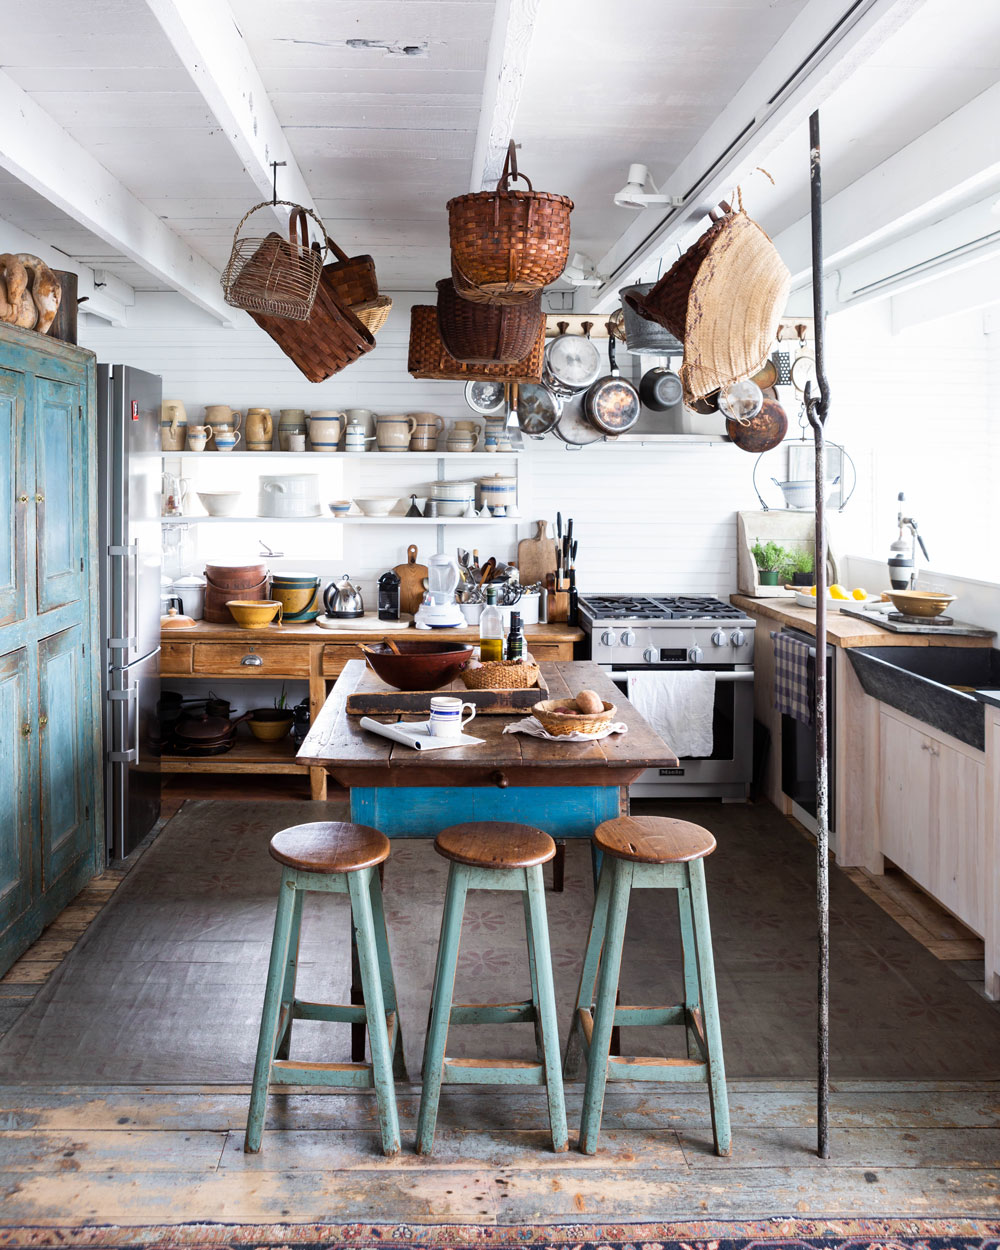 The Mrozinskis cook every meal together, and it shows. Well-used pots and pans. Knife marks in the butcher’s block. A prep-slash-dining table. This is clearly a working kitchen, even with its whimsical basket and pottery displays.